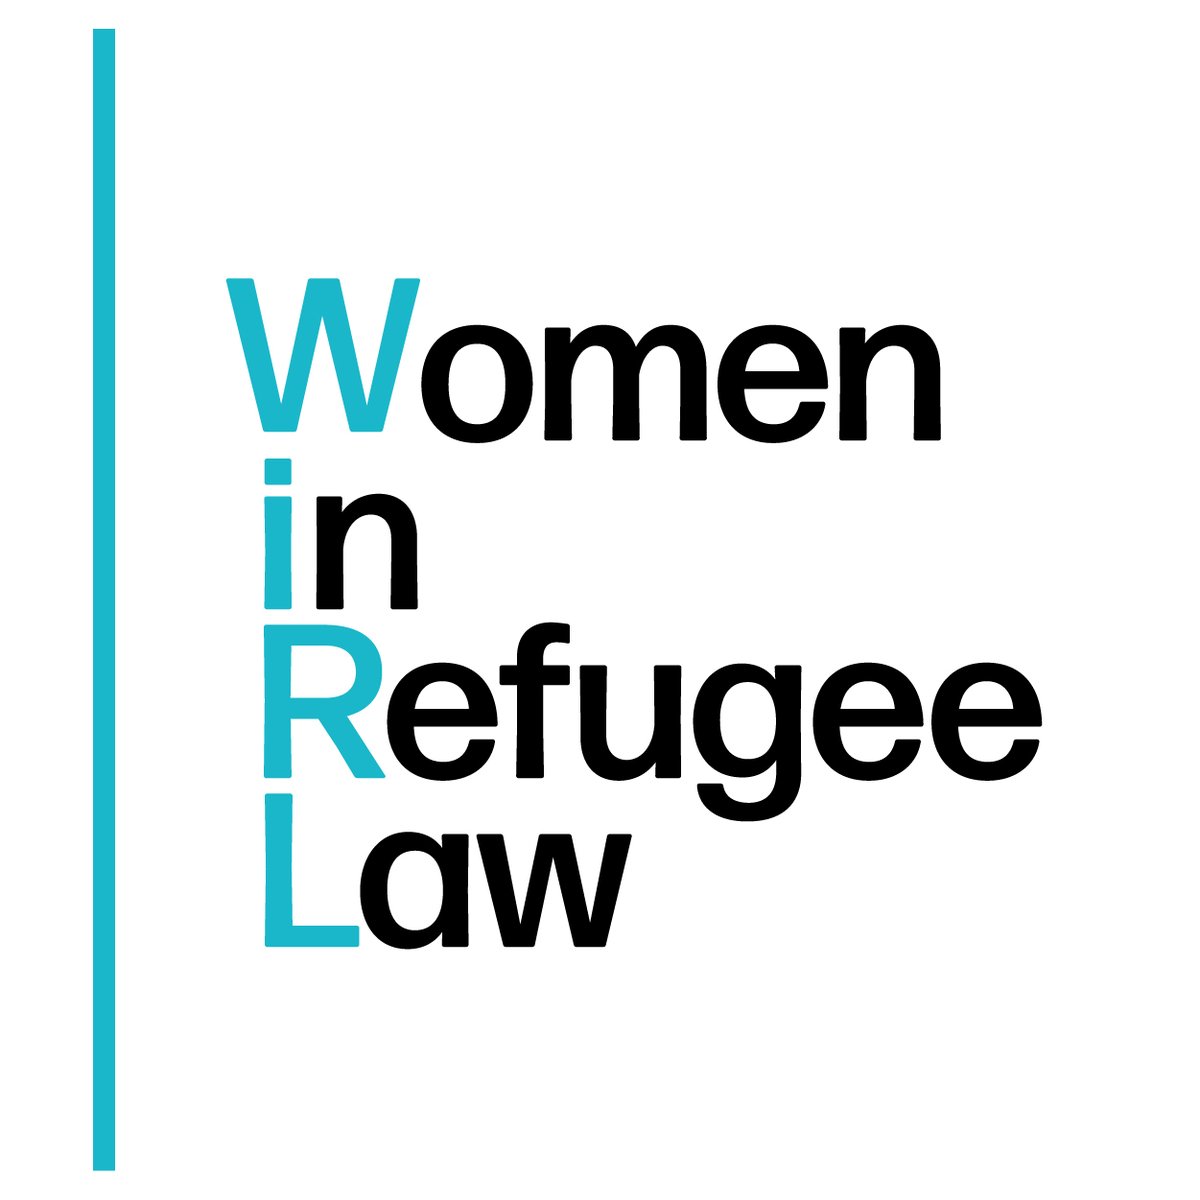 We have a new logo. Check us out and give us a follow! #RefugeeWomen #RefugeeLaw #RefugeePolicy